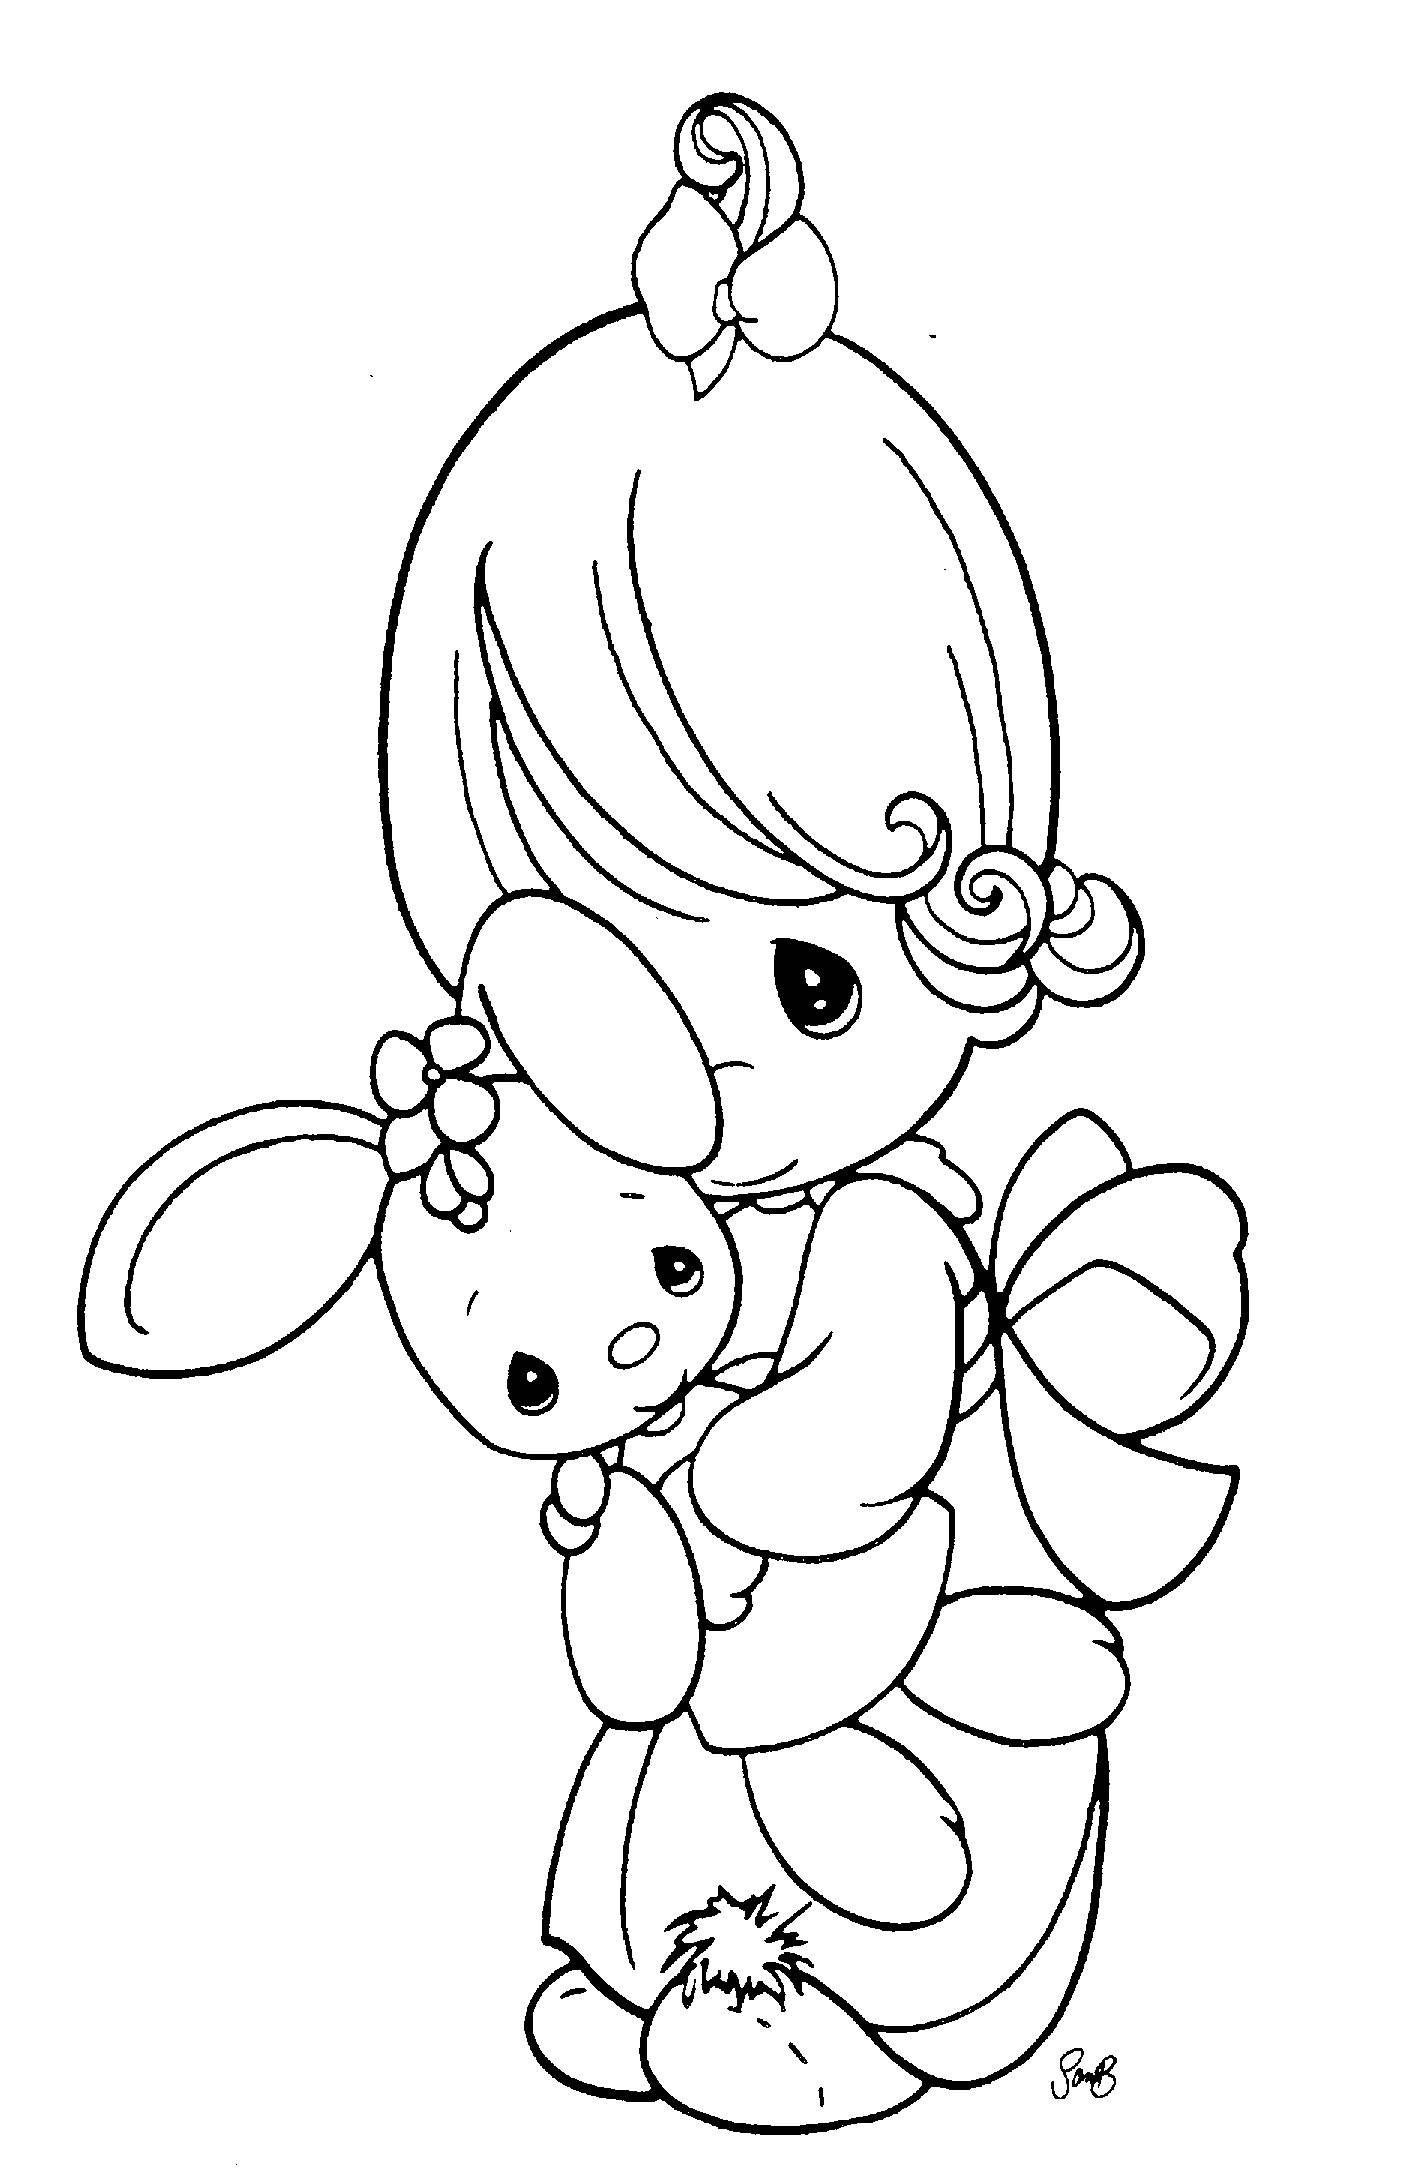 Coloring Pages To Print
 Free Printable Precious Moments Coloring Pages For Kids